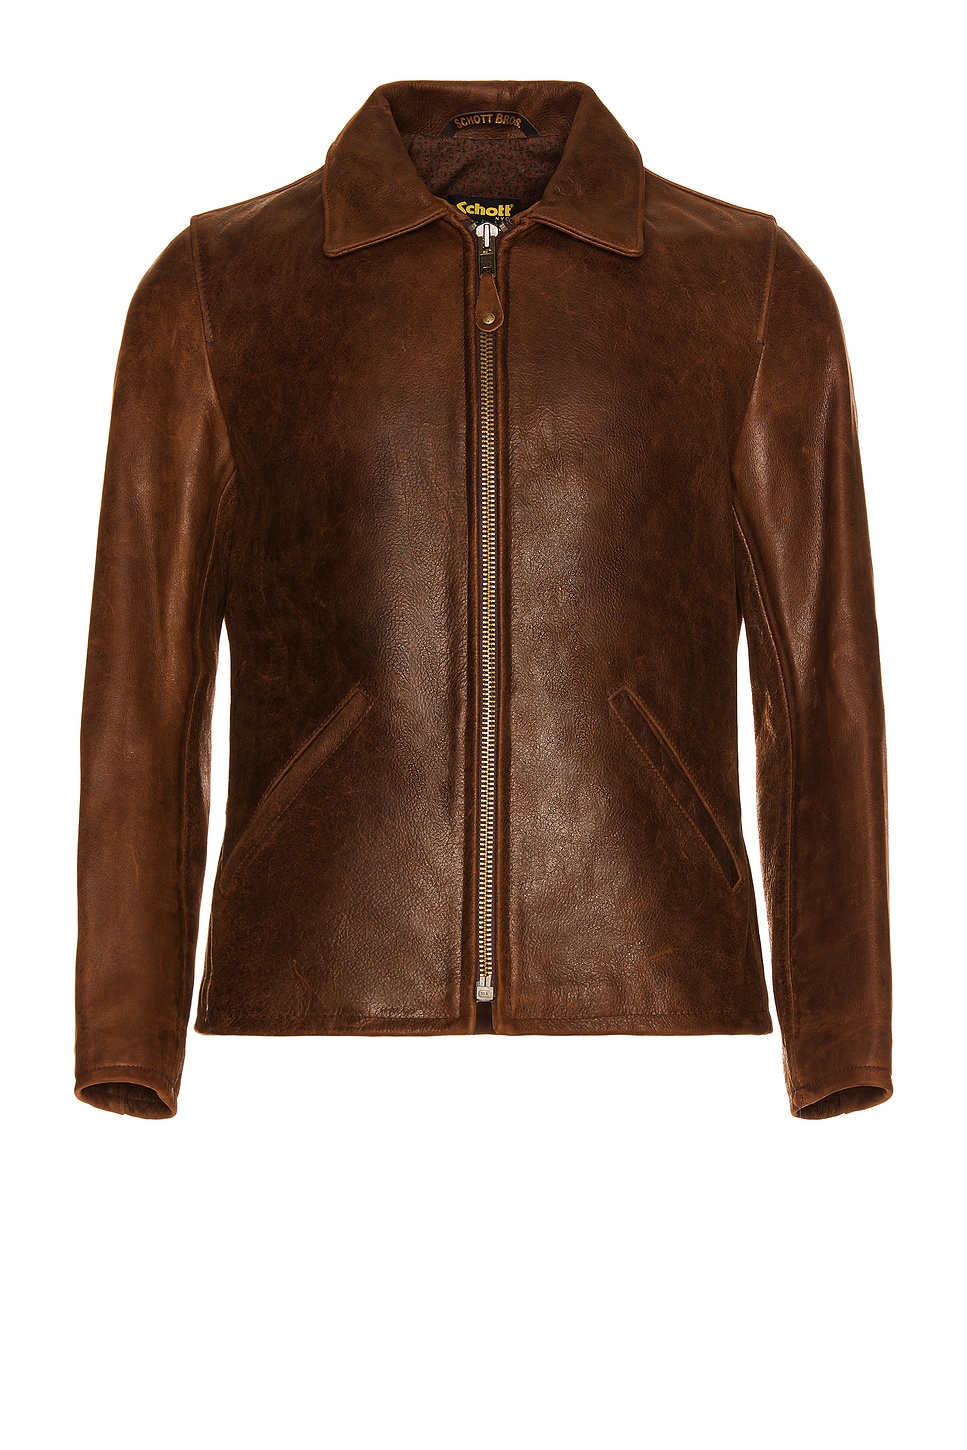 Image 1 of Schott Waxy Buffalo Leather Sunset Jacket in Brown